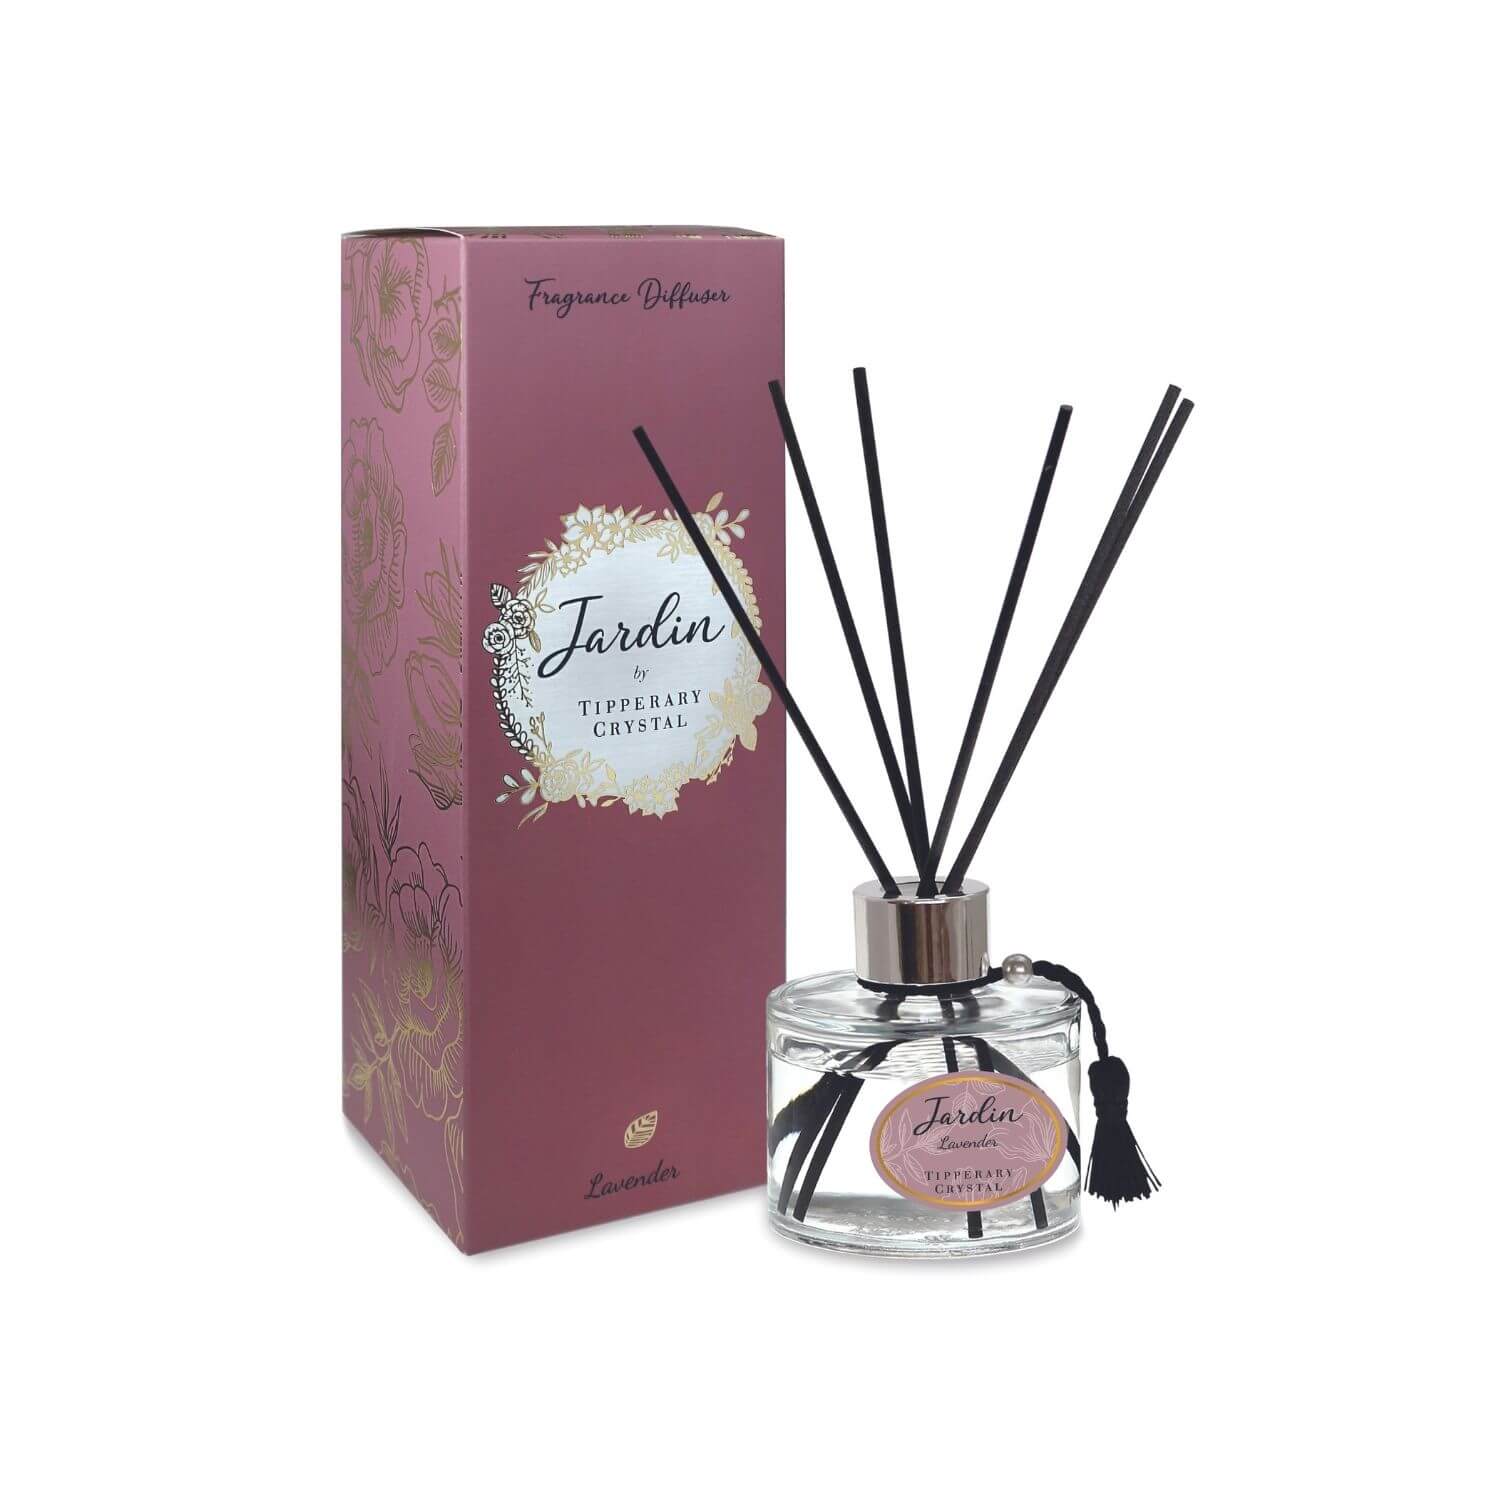 Tipperary Crystal Jardin Collection Diffuser - Lavender 1 Shaws Department Stores